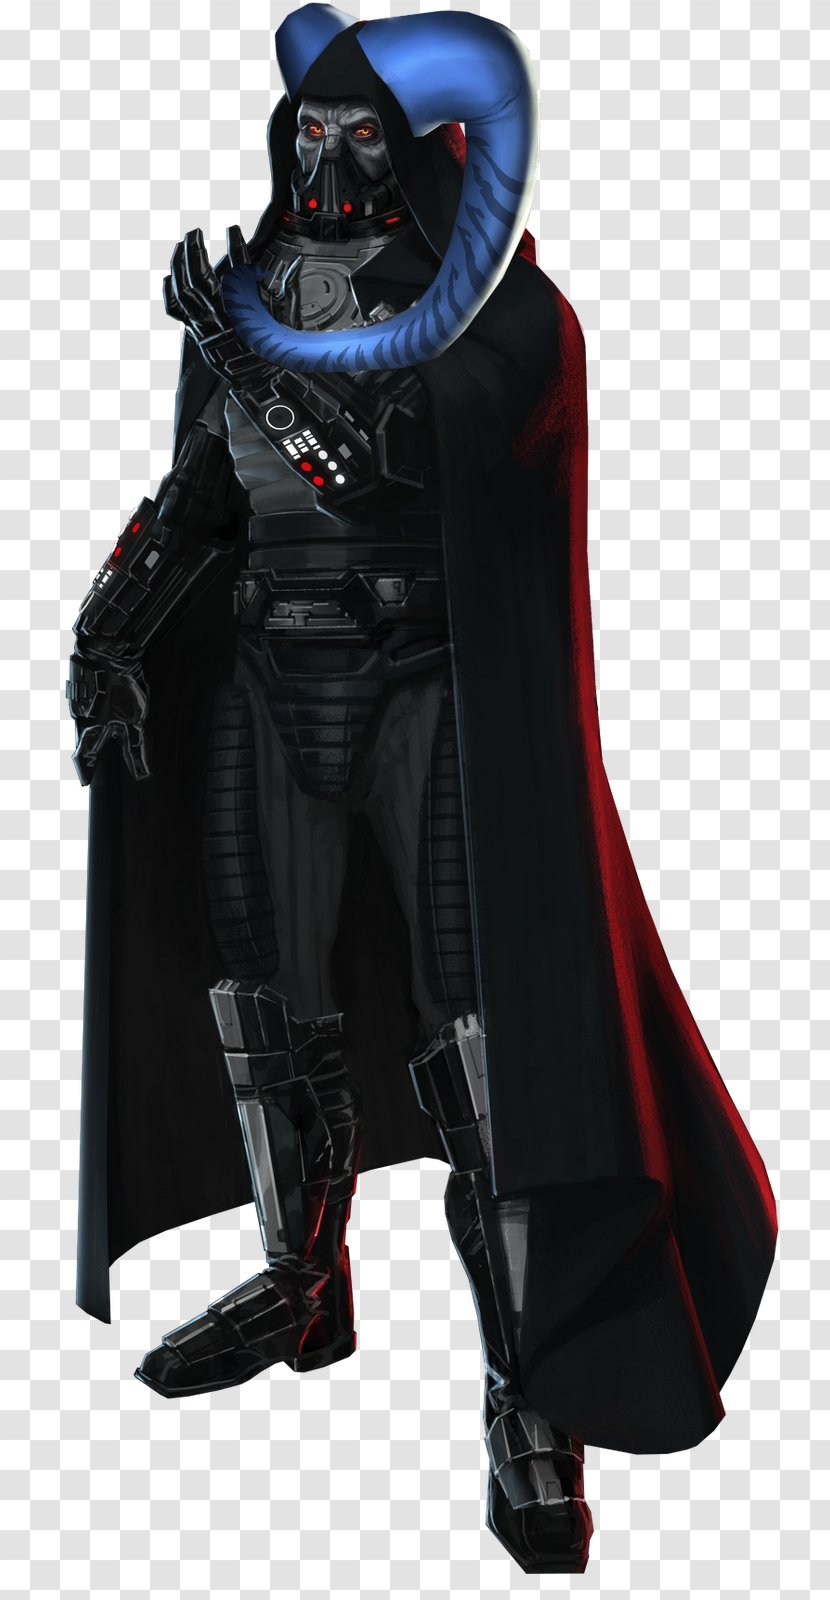 Star Wars: The Old Republic Anakin Skywalker Sith Video Game - Jedi - Wars Transparent PNG